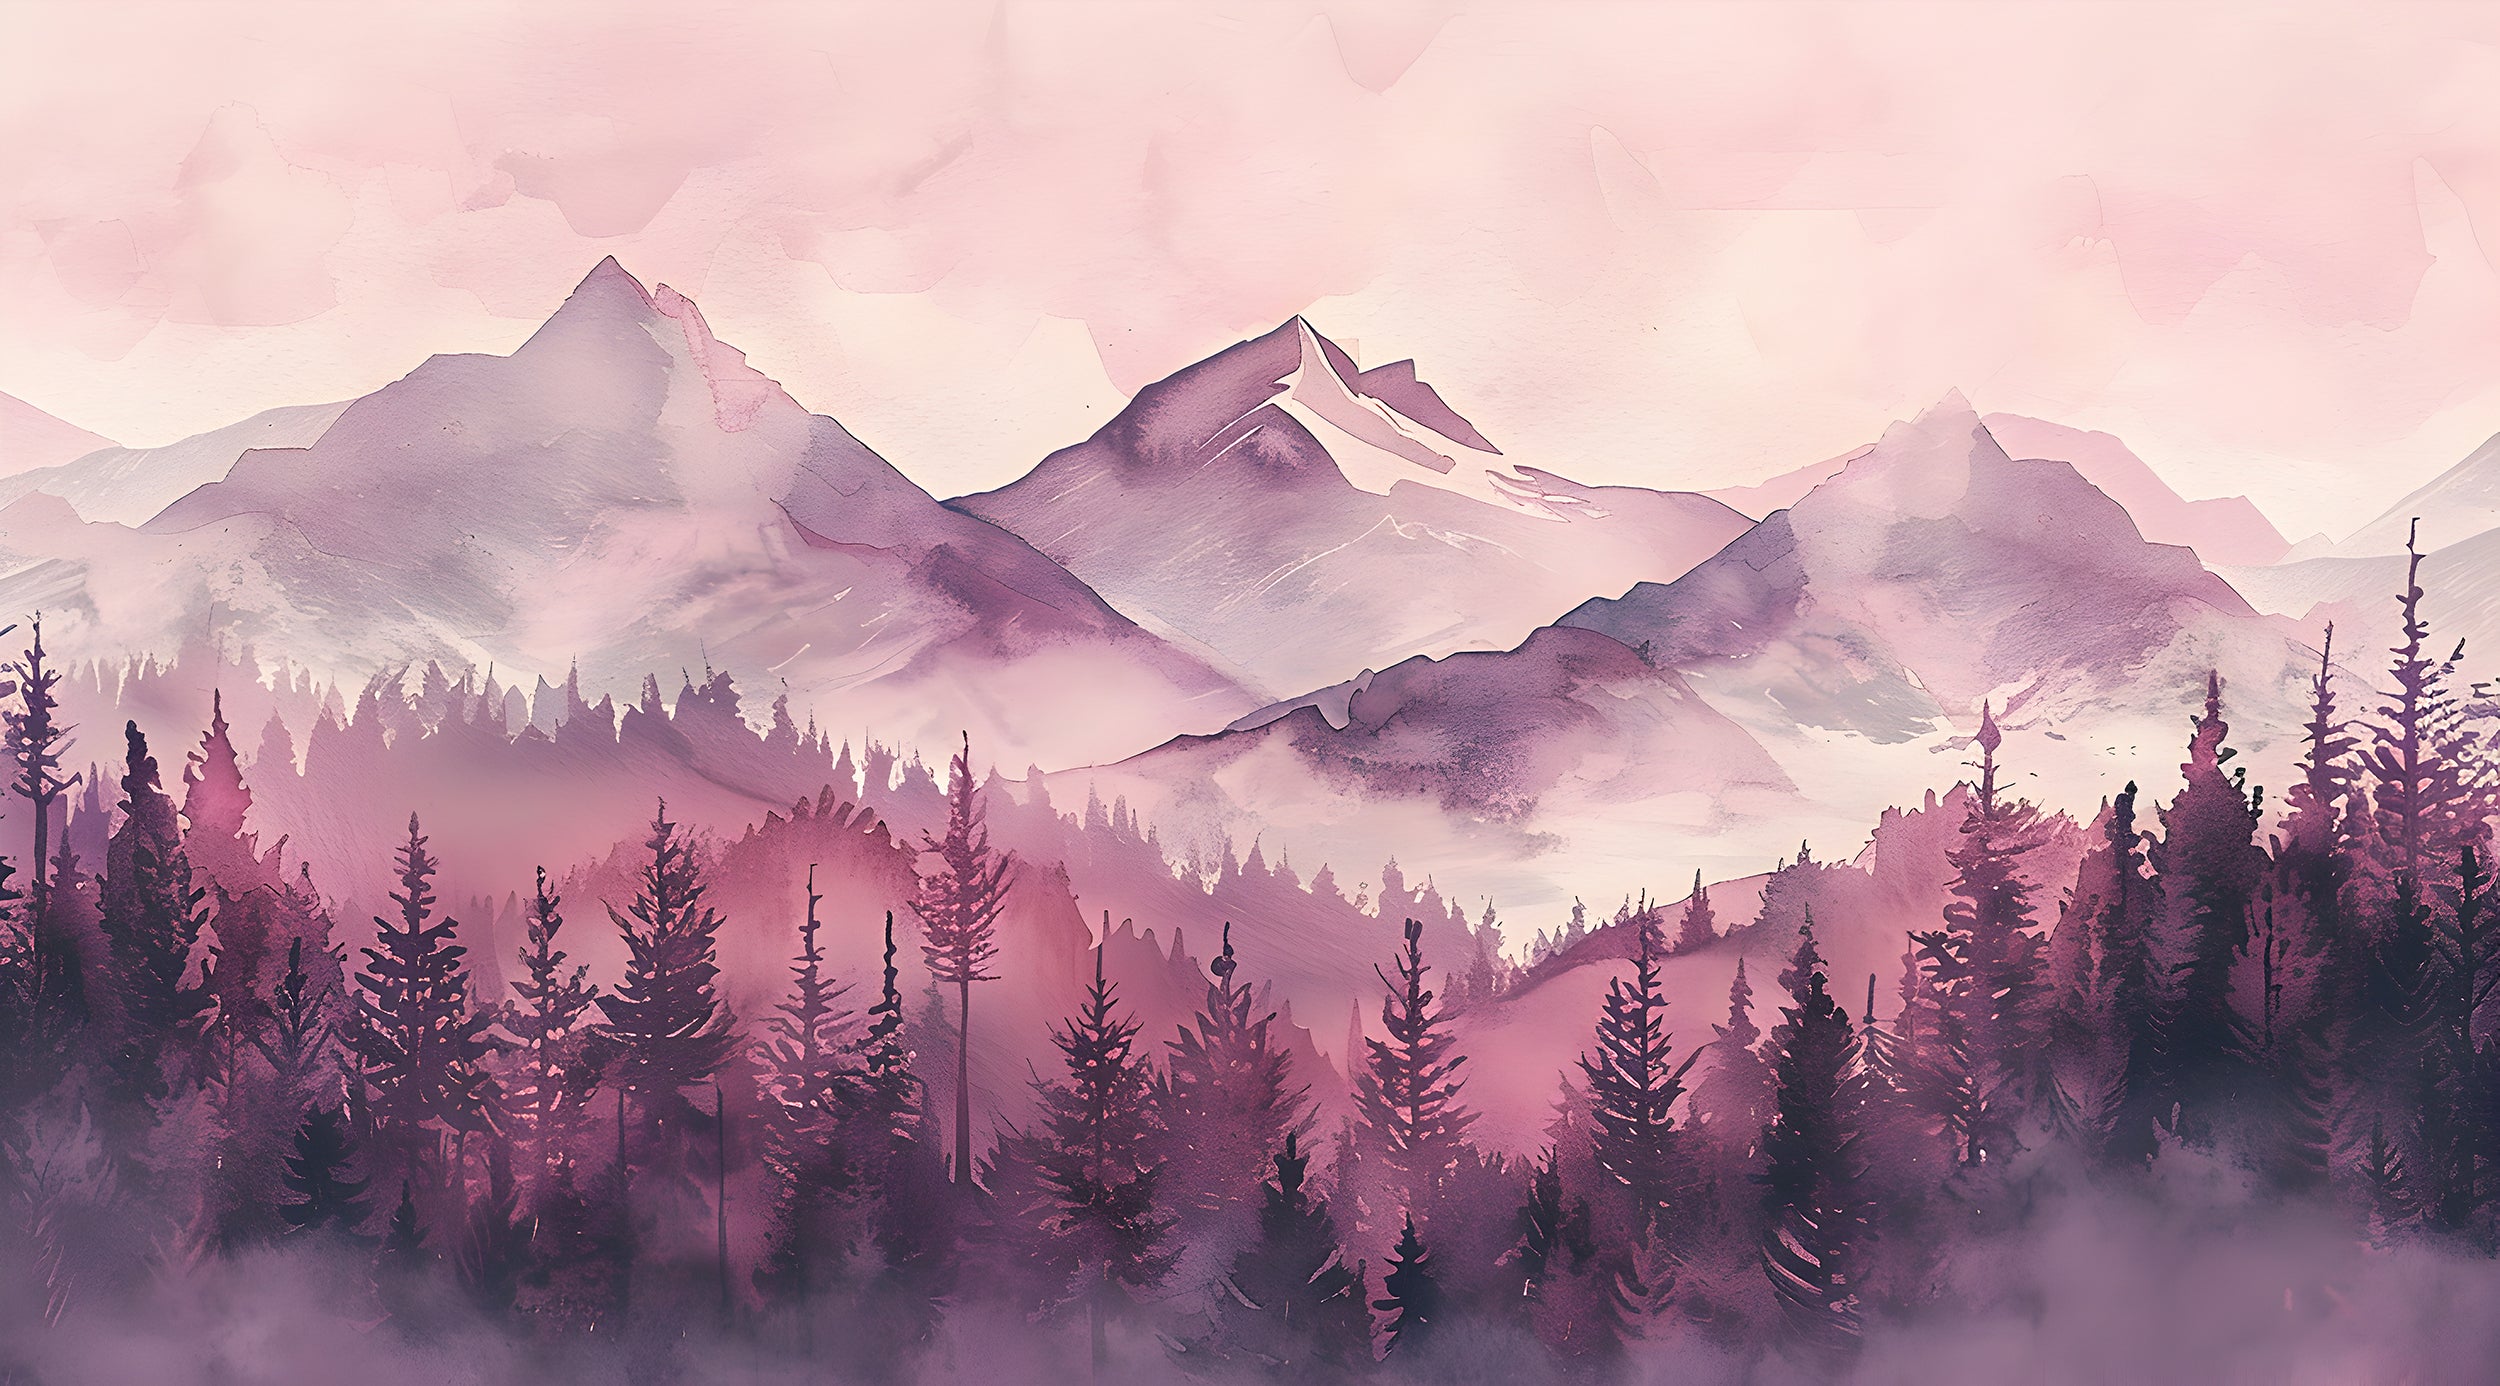 Soft Pink Mountains and Forest Mural, Peel and Stick Watercolor Mountains Landscape Wallpaper, Nursery Removable Custom Size Decor